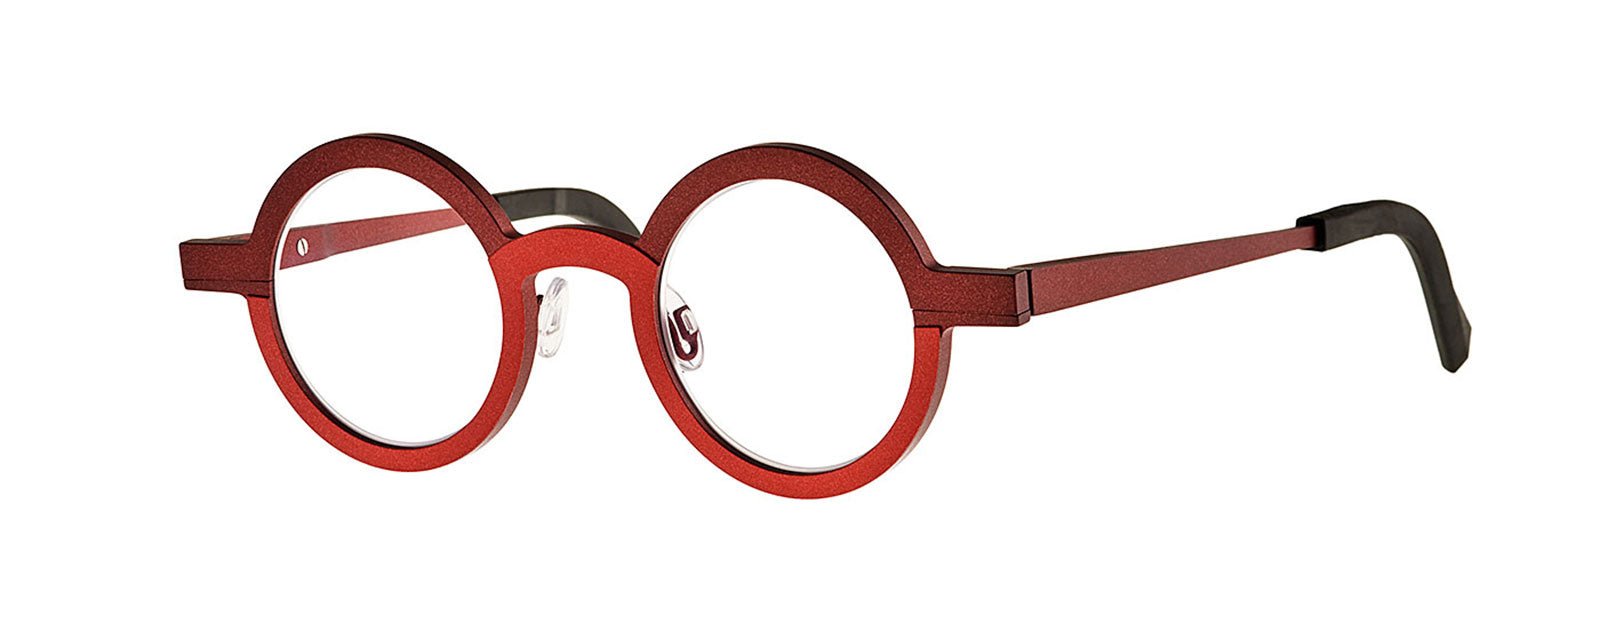 Armstrong 311 (763 + 736) by Theo Eyewear